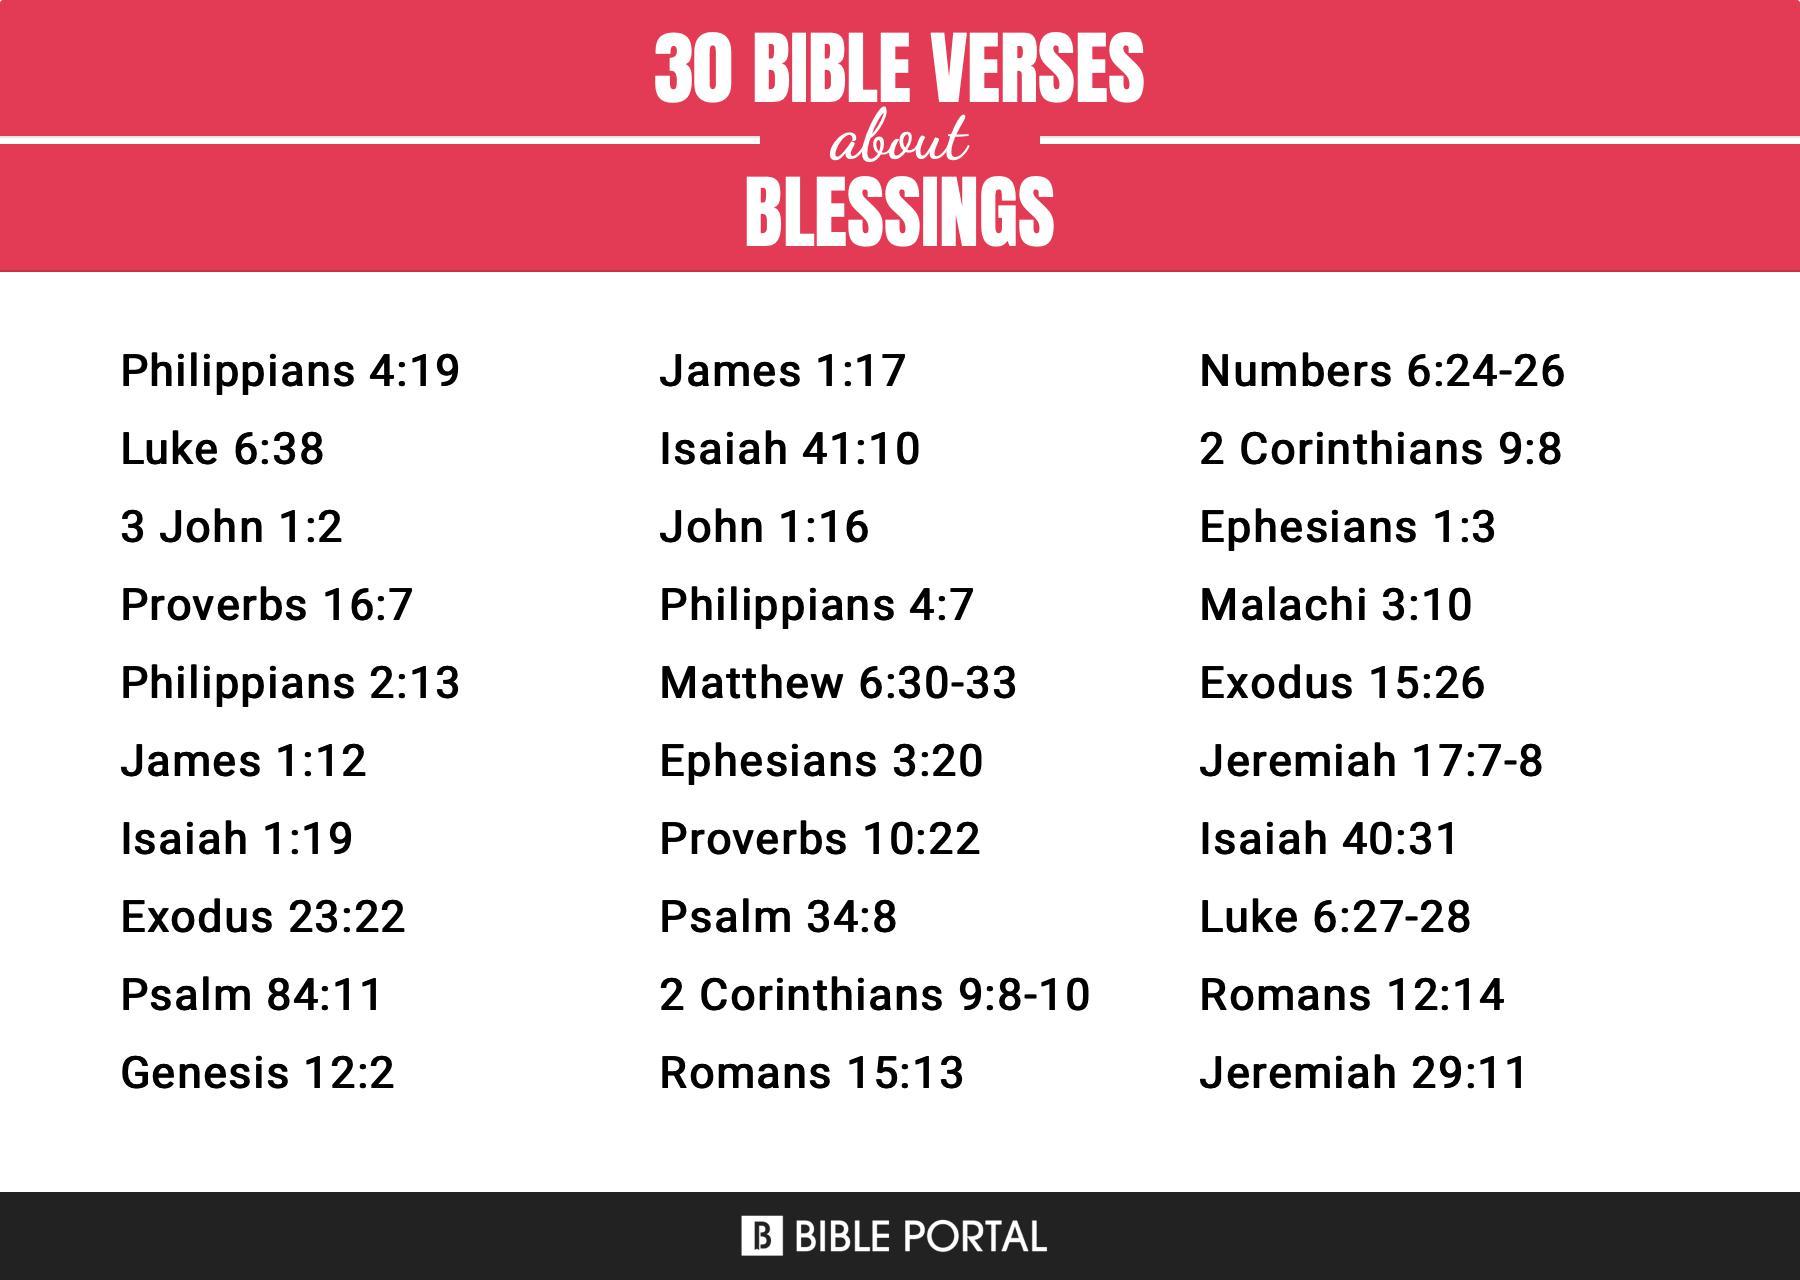 What Does the Bible Say about Blessings?